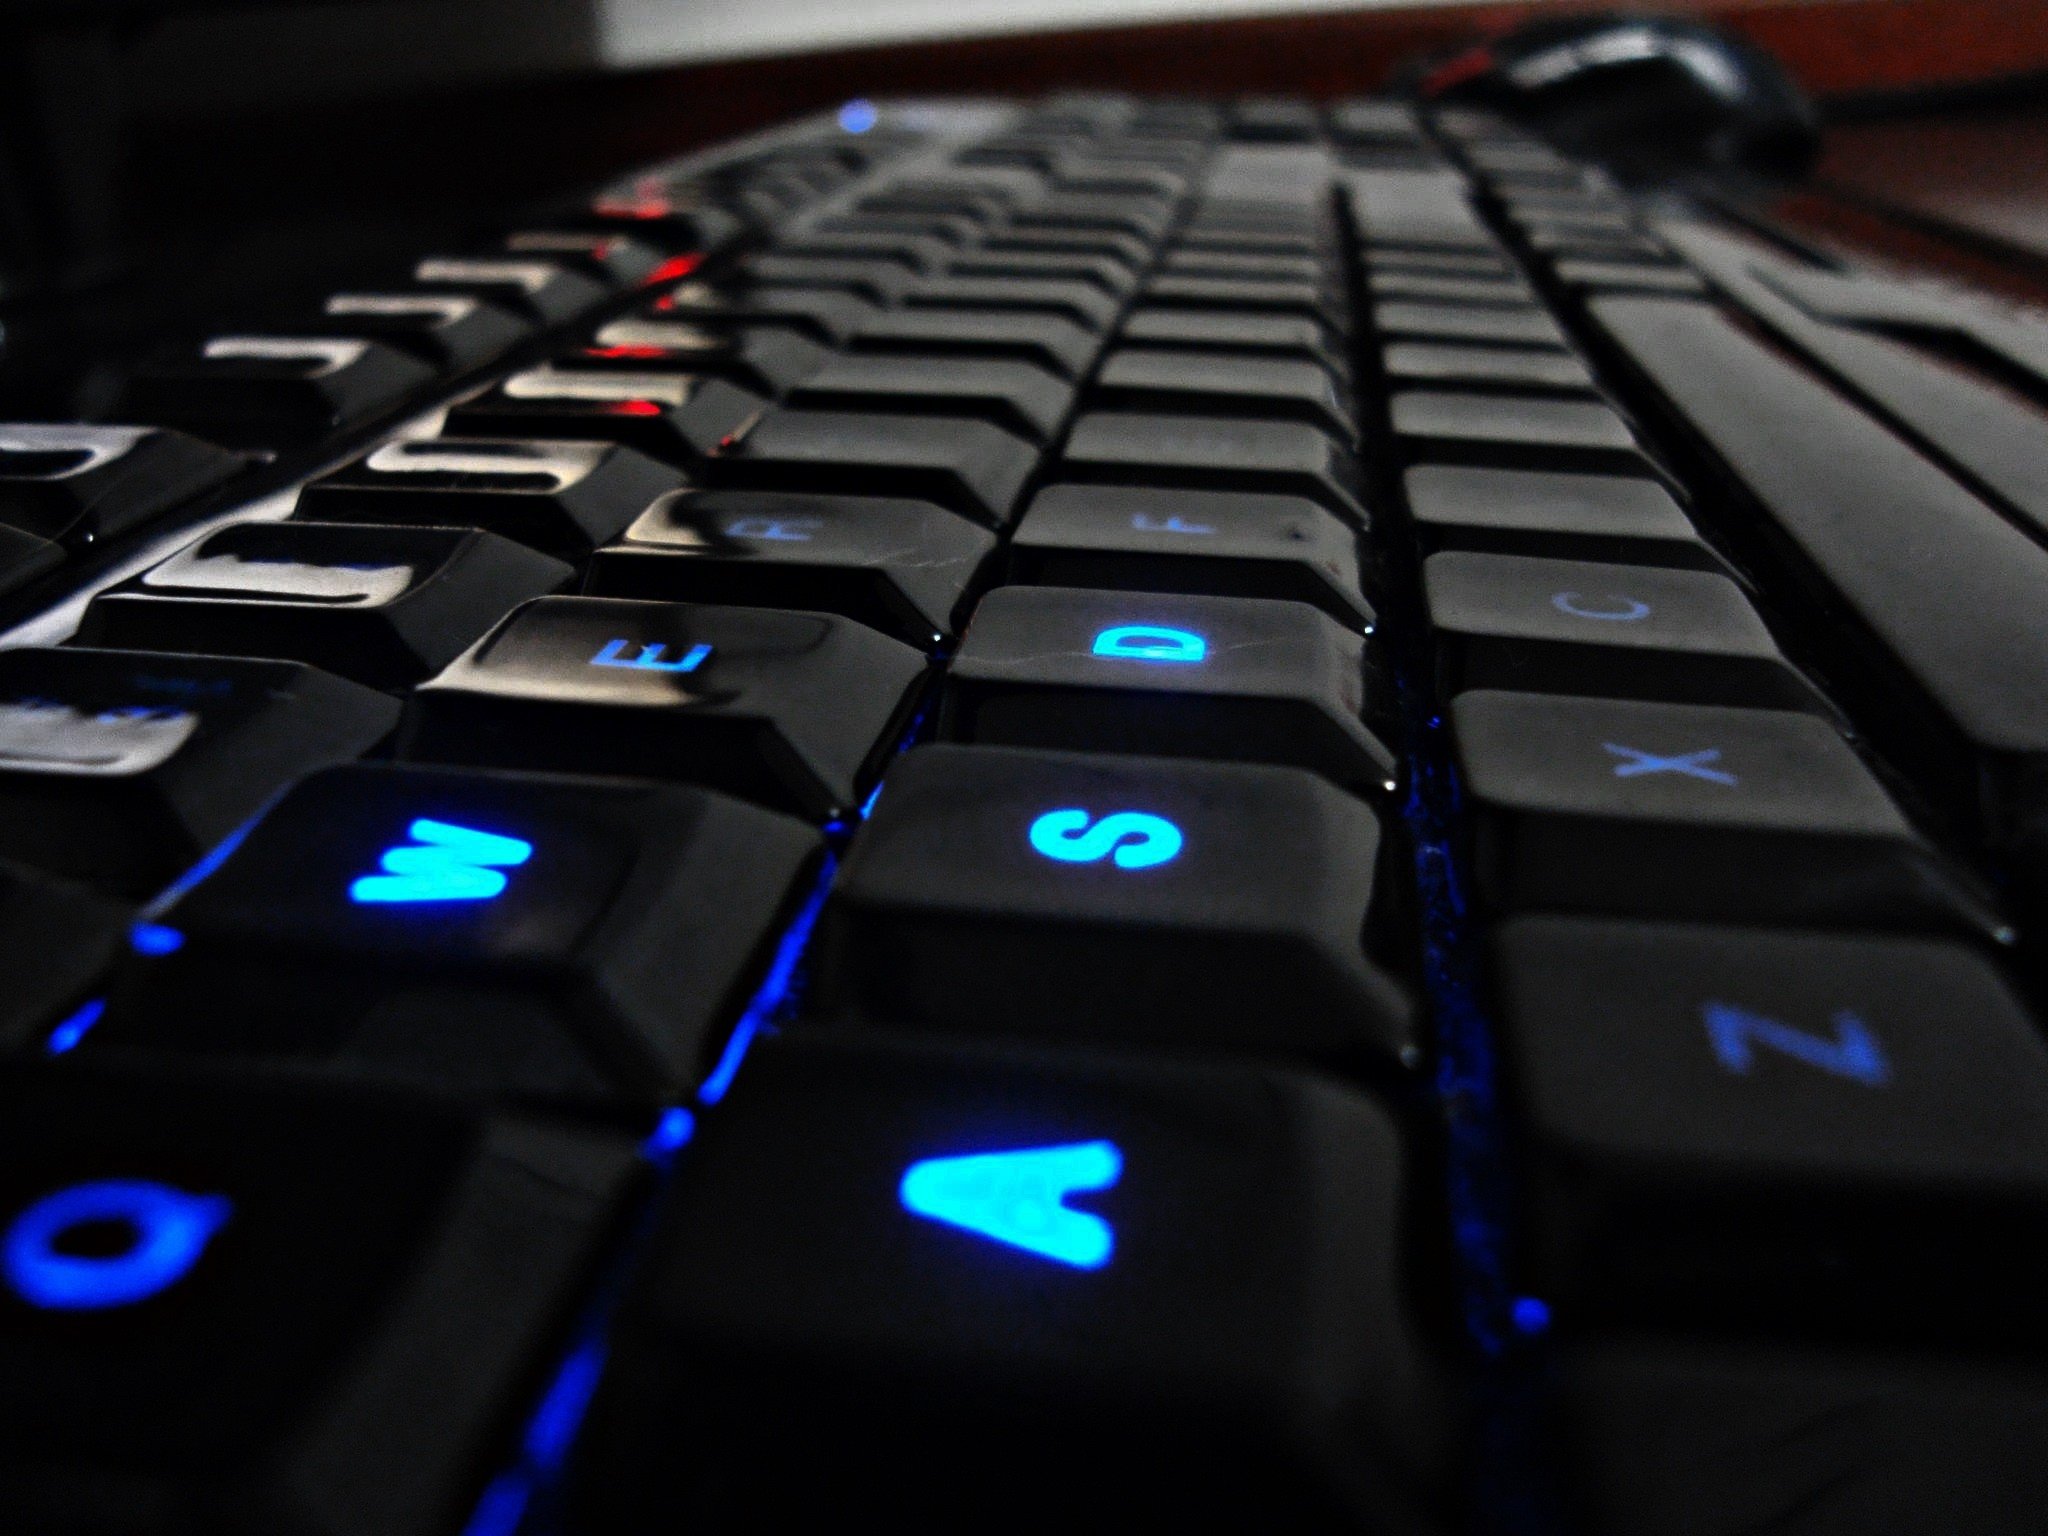 Keyboards Gamers Steelseries Hd Wallpapers Desktop And Mobile Images Photos